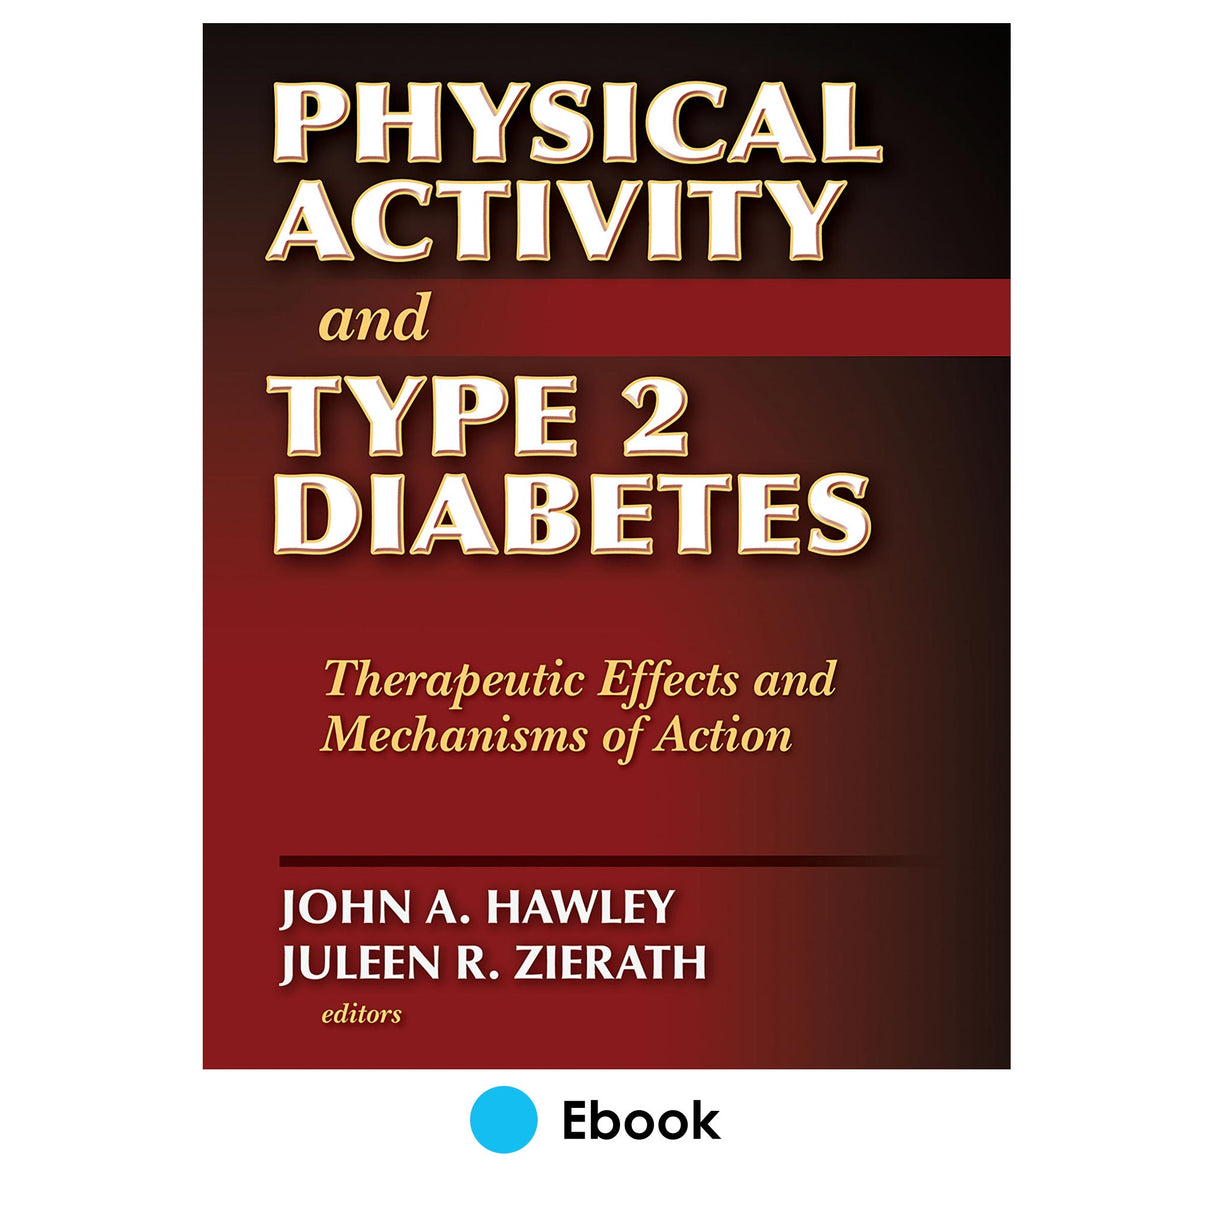 Physical Activity and Type 2 Diabetes PDF